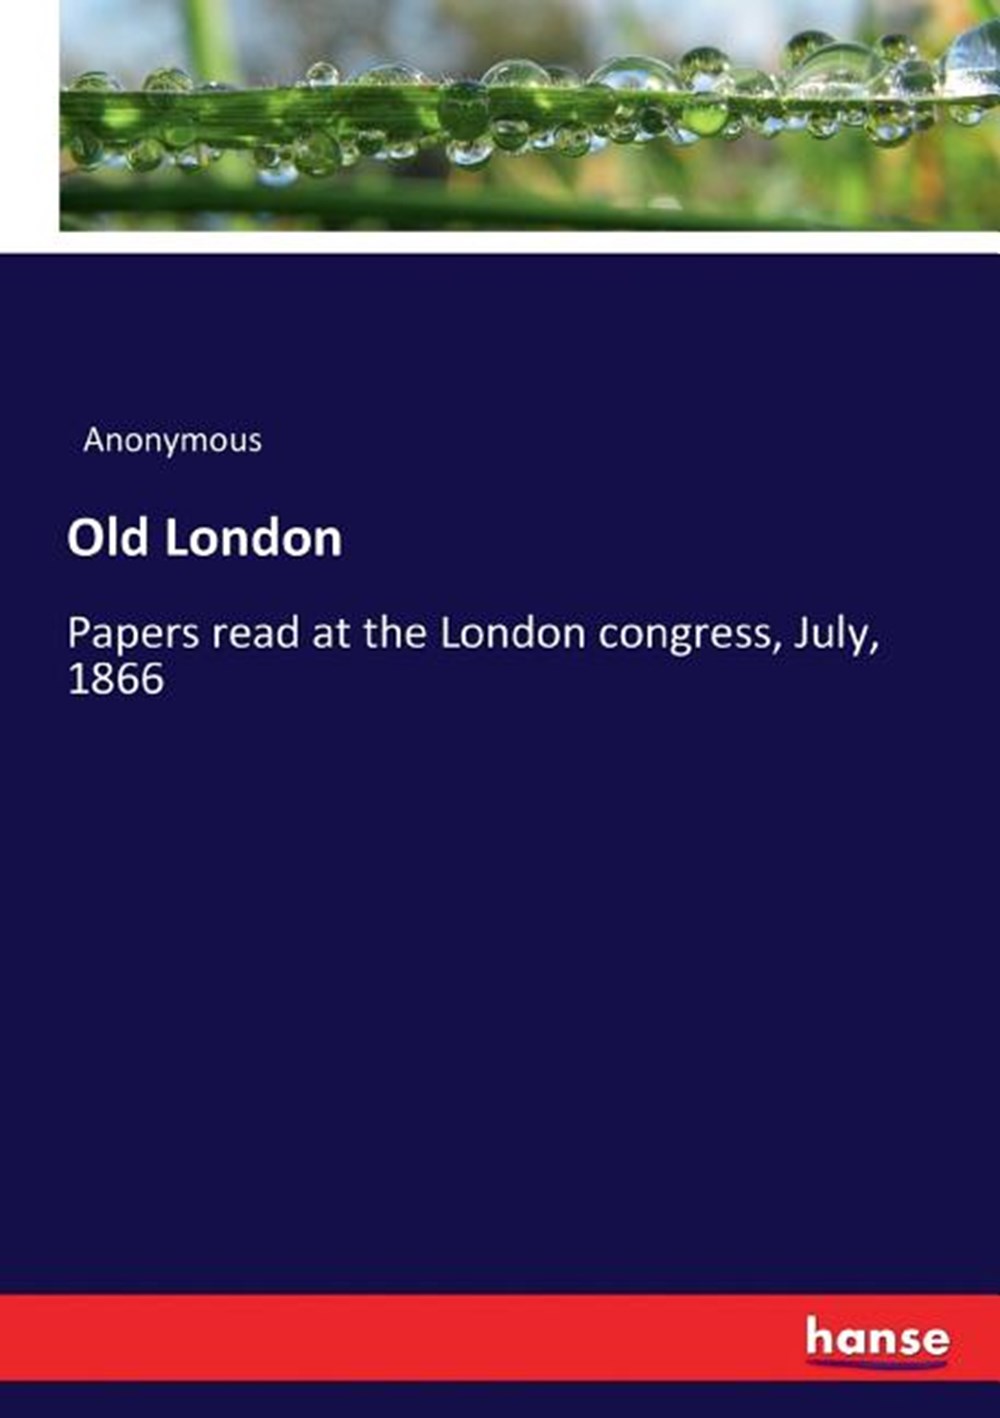 Old London: Papers read at the London congress, July, 1866